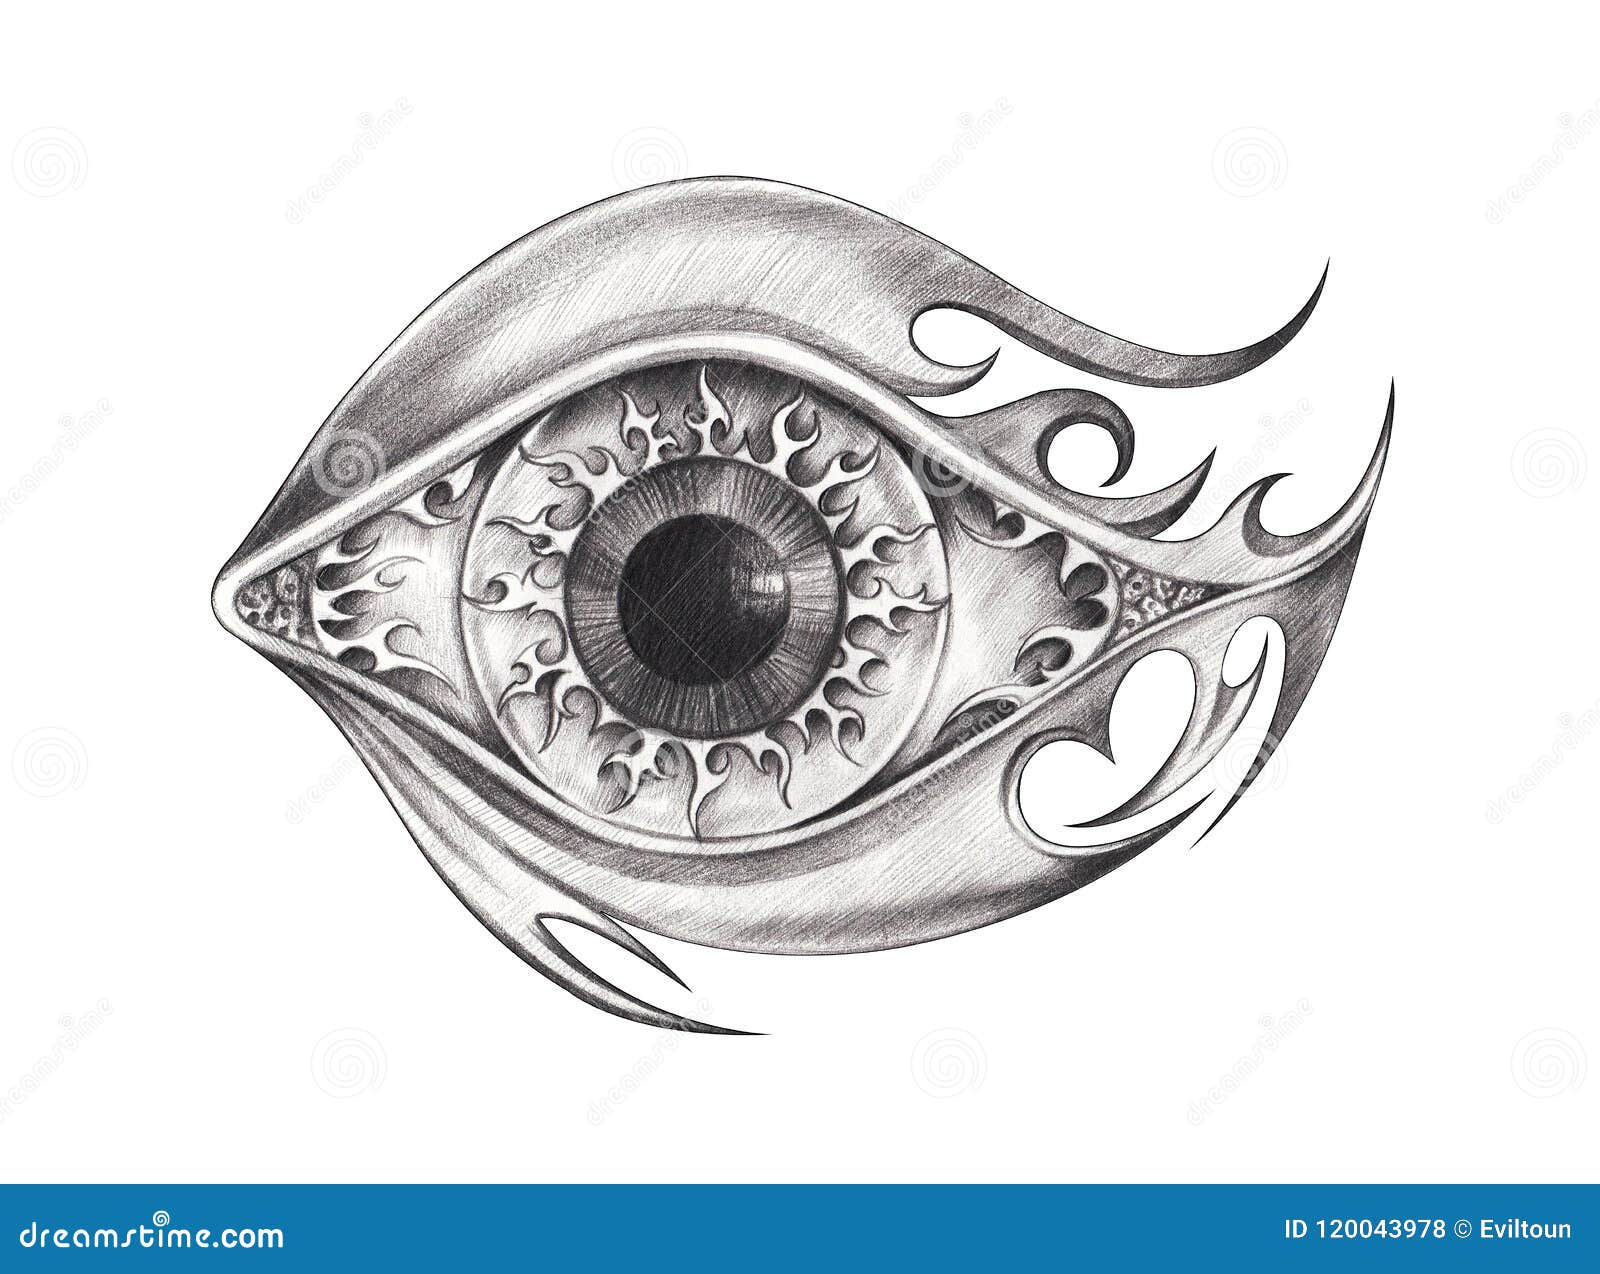 Eye Tattoo Vector Images over 22000